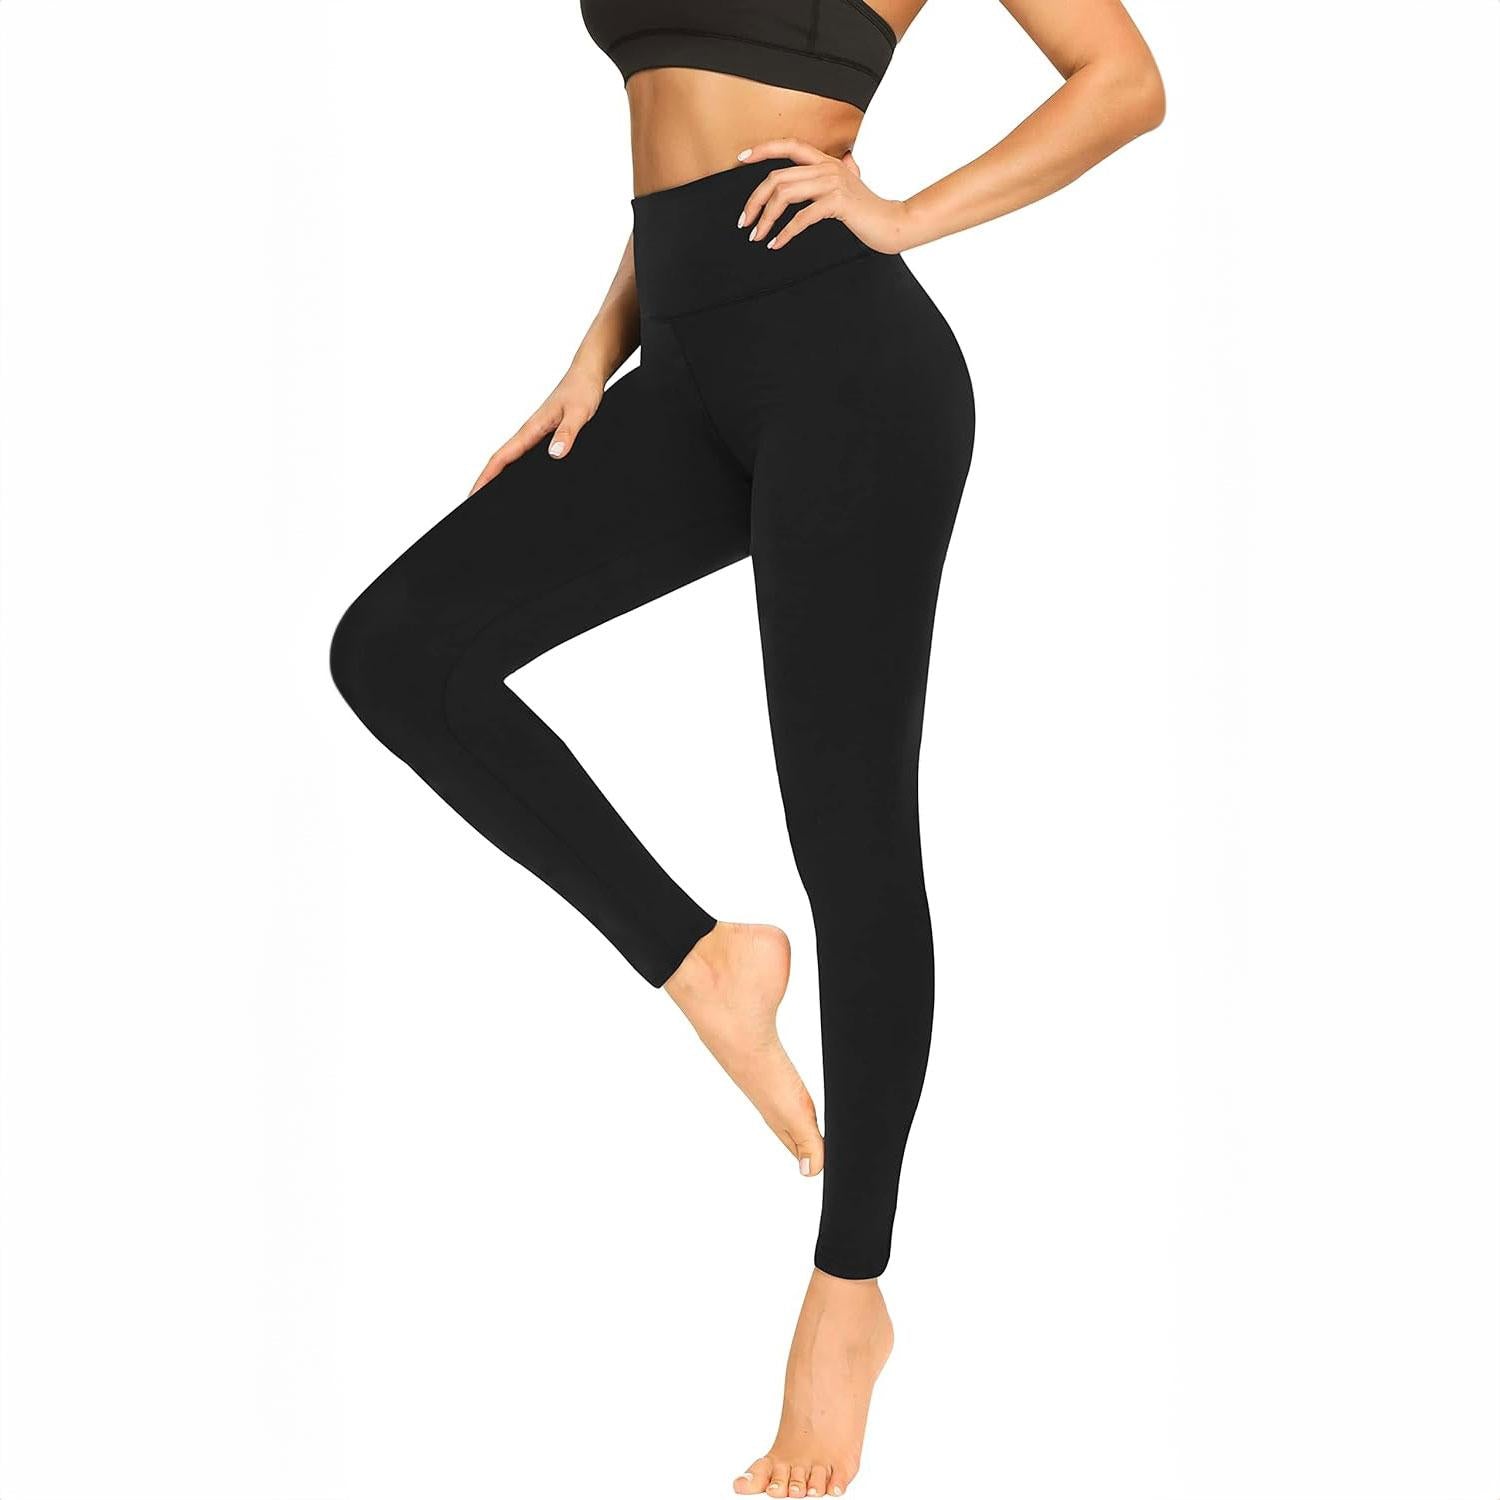 High Waisted Leggings For Women- Soft Tummy Control Slimming Yoga Pants For  Workout Running